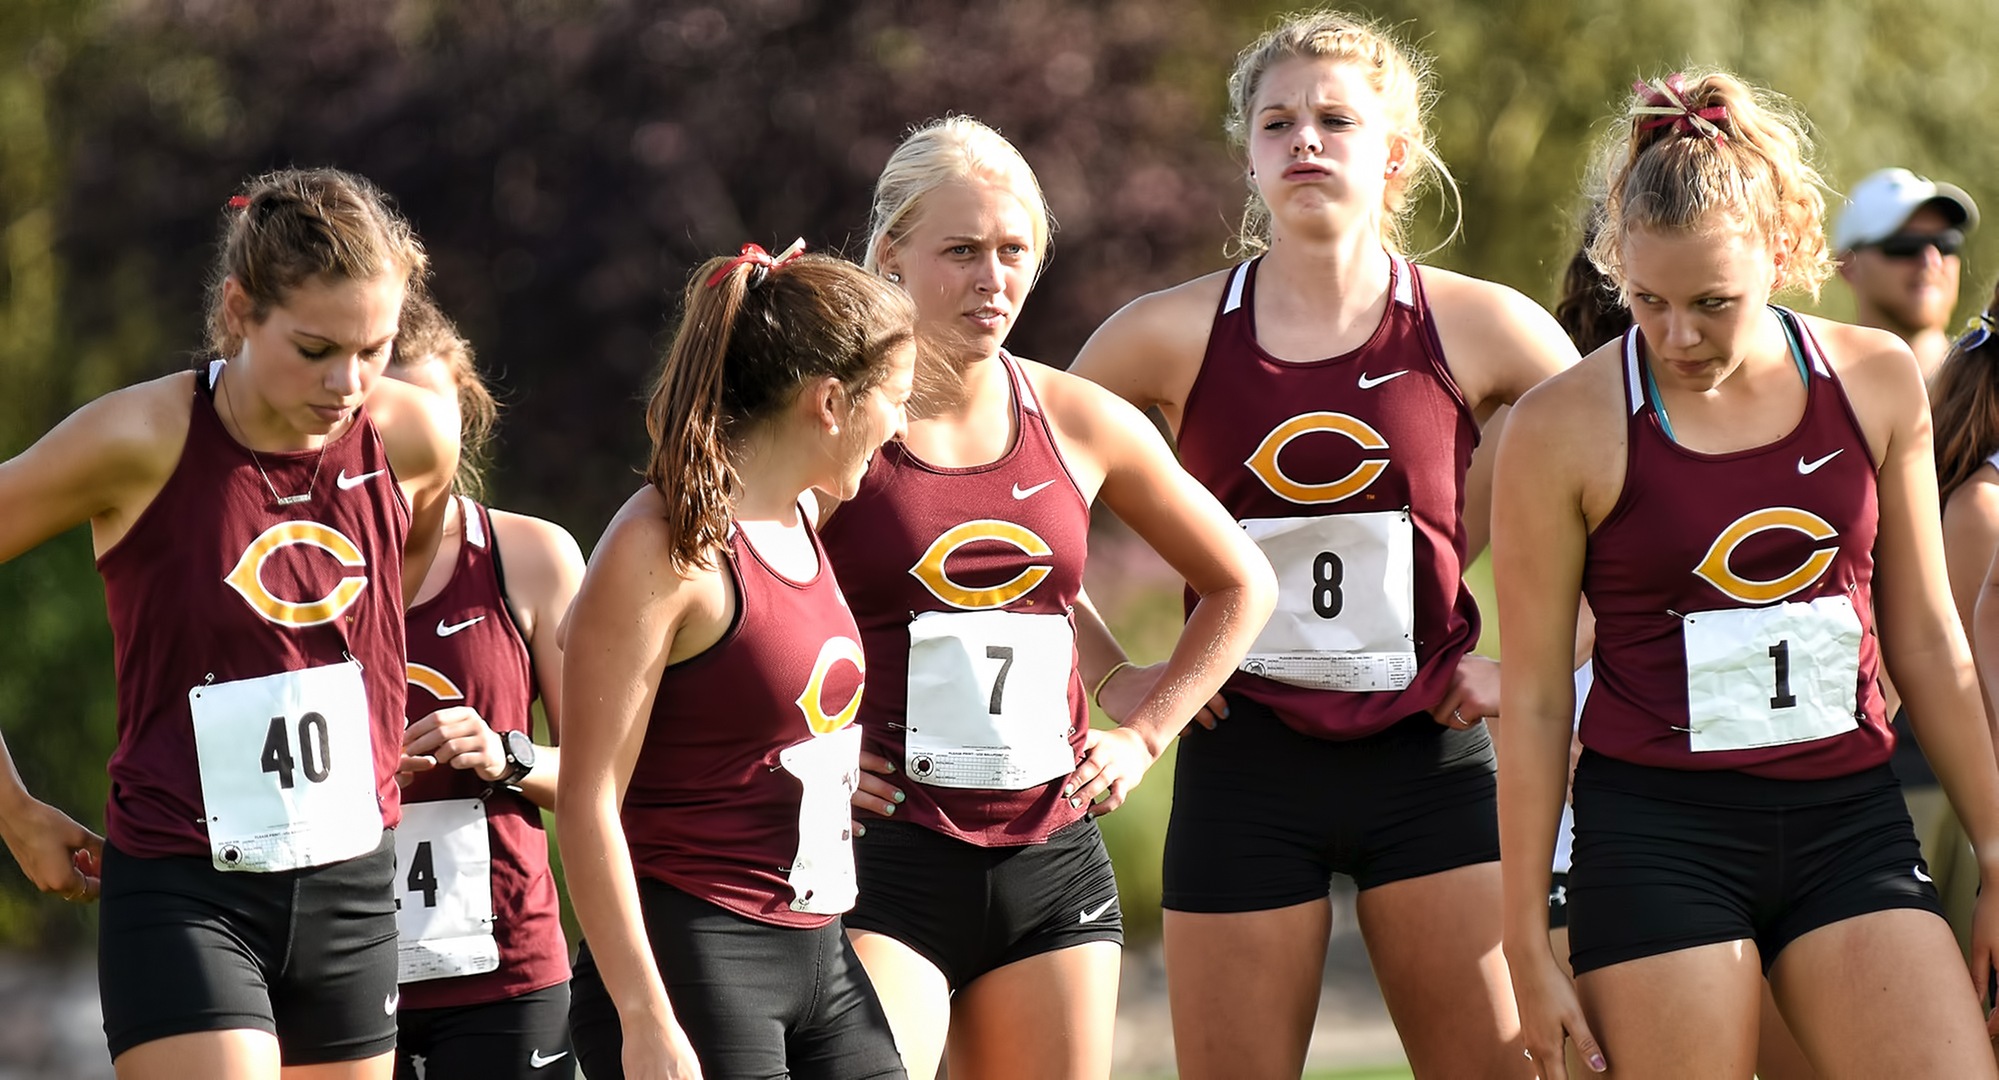 The Cobbers finished third at the MSU Moorhead Twilight Meet.